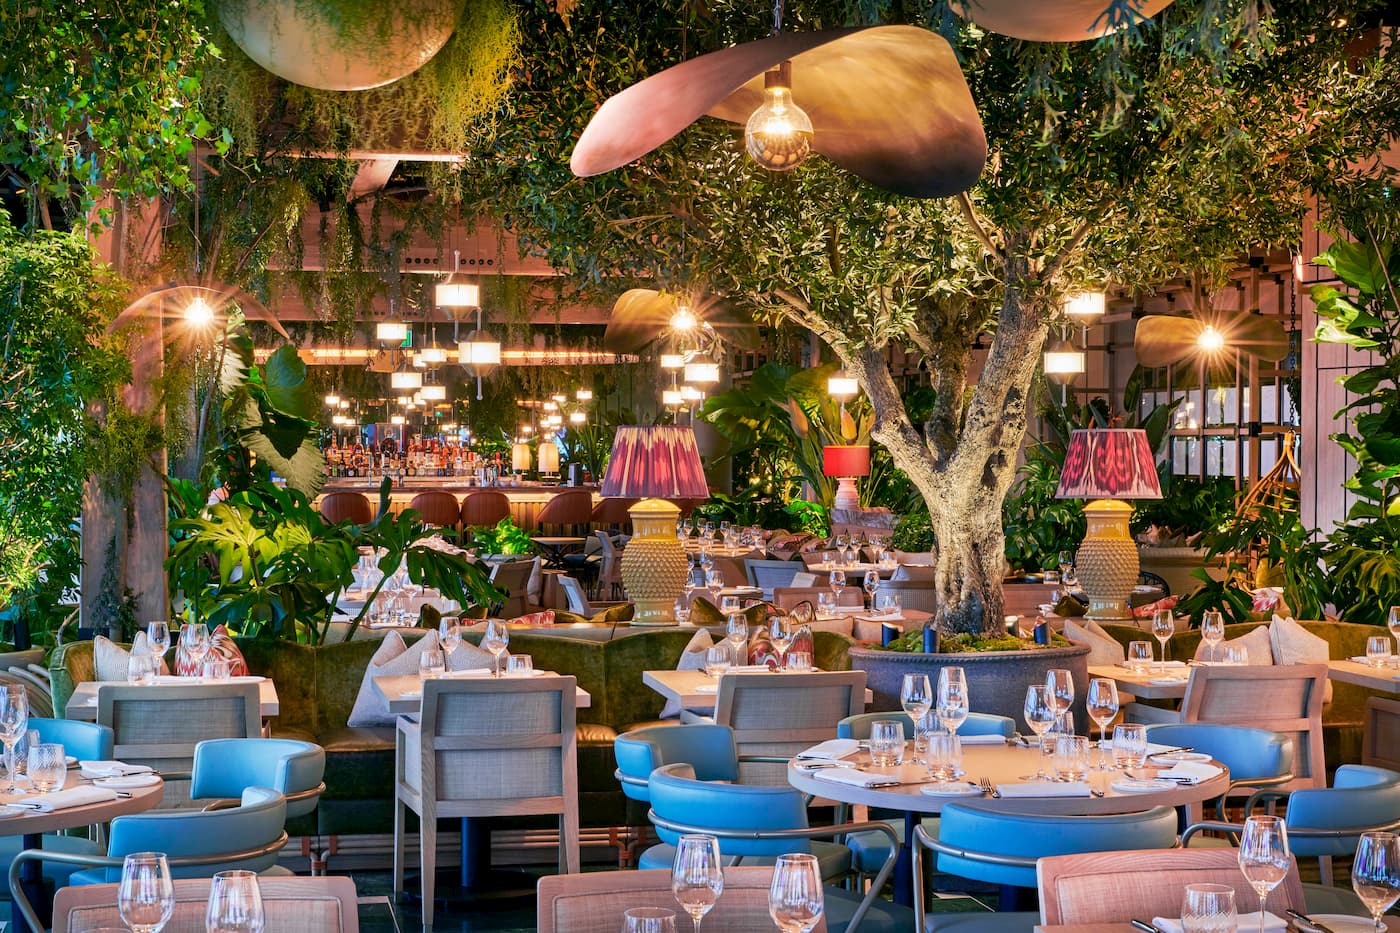 The interior of an upscale restaurant with leafy decorations, warm lights and pale pink-and-blue decor.